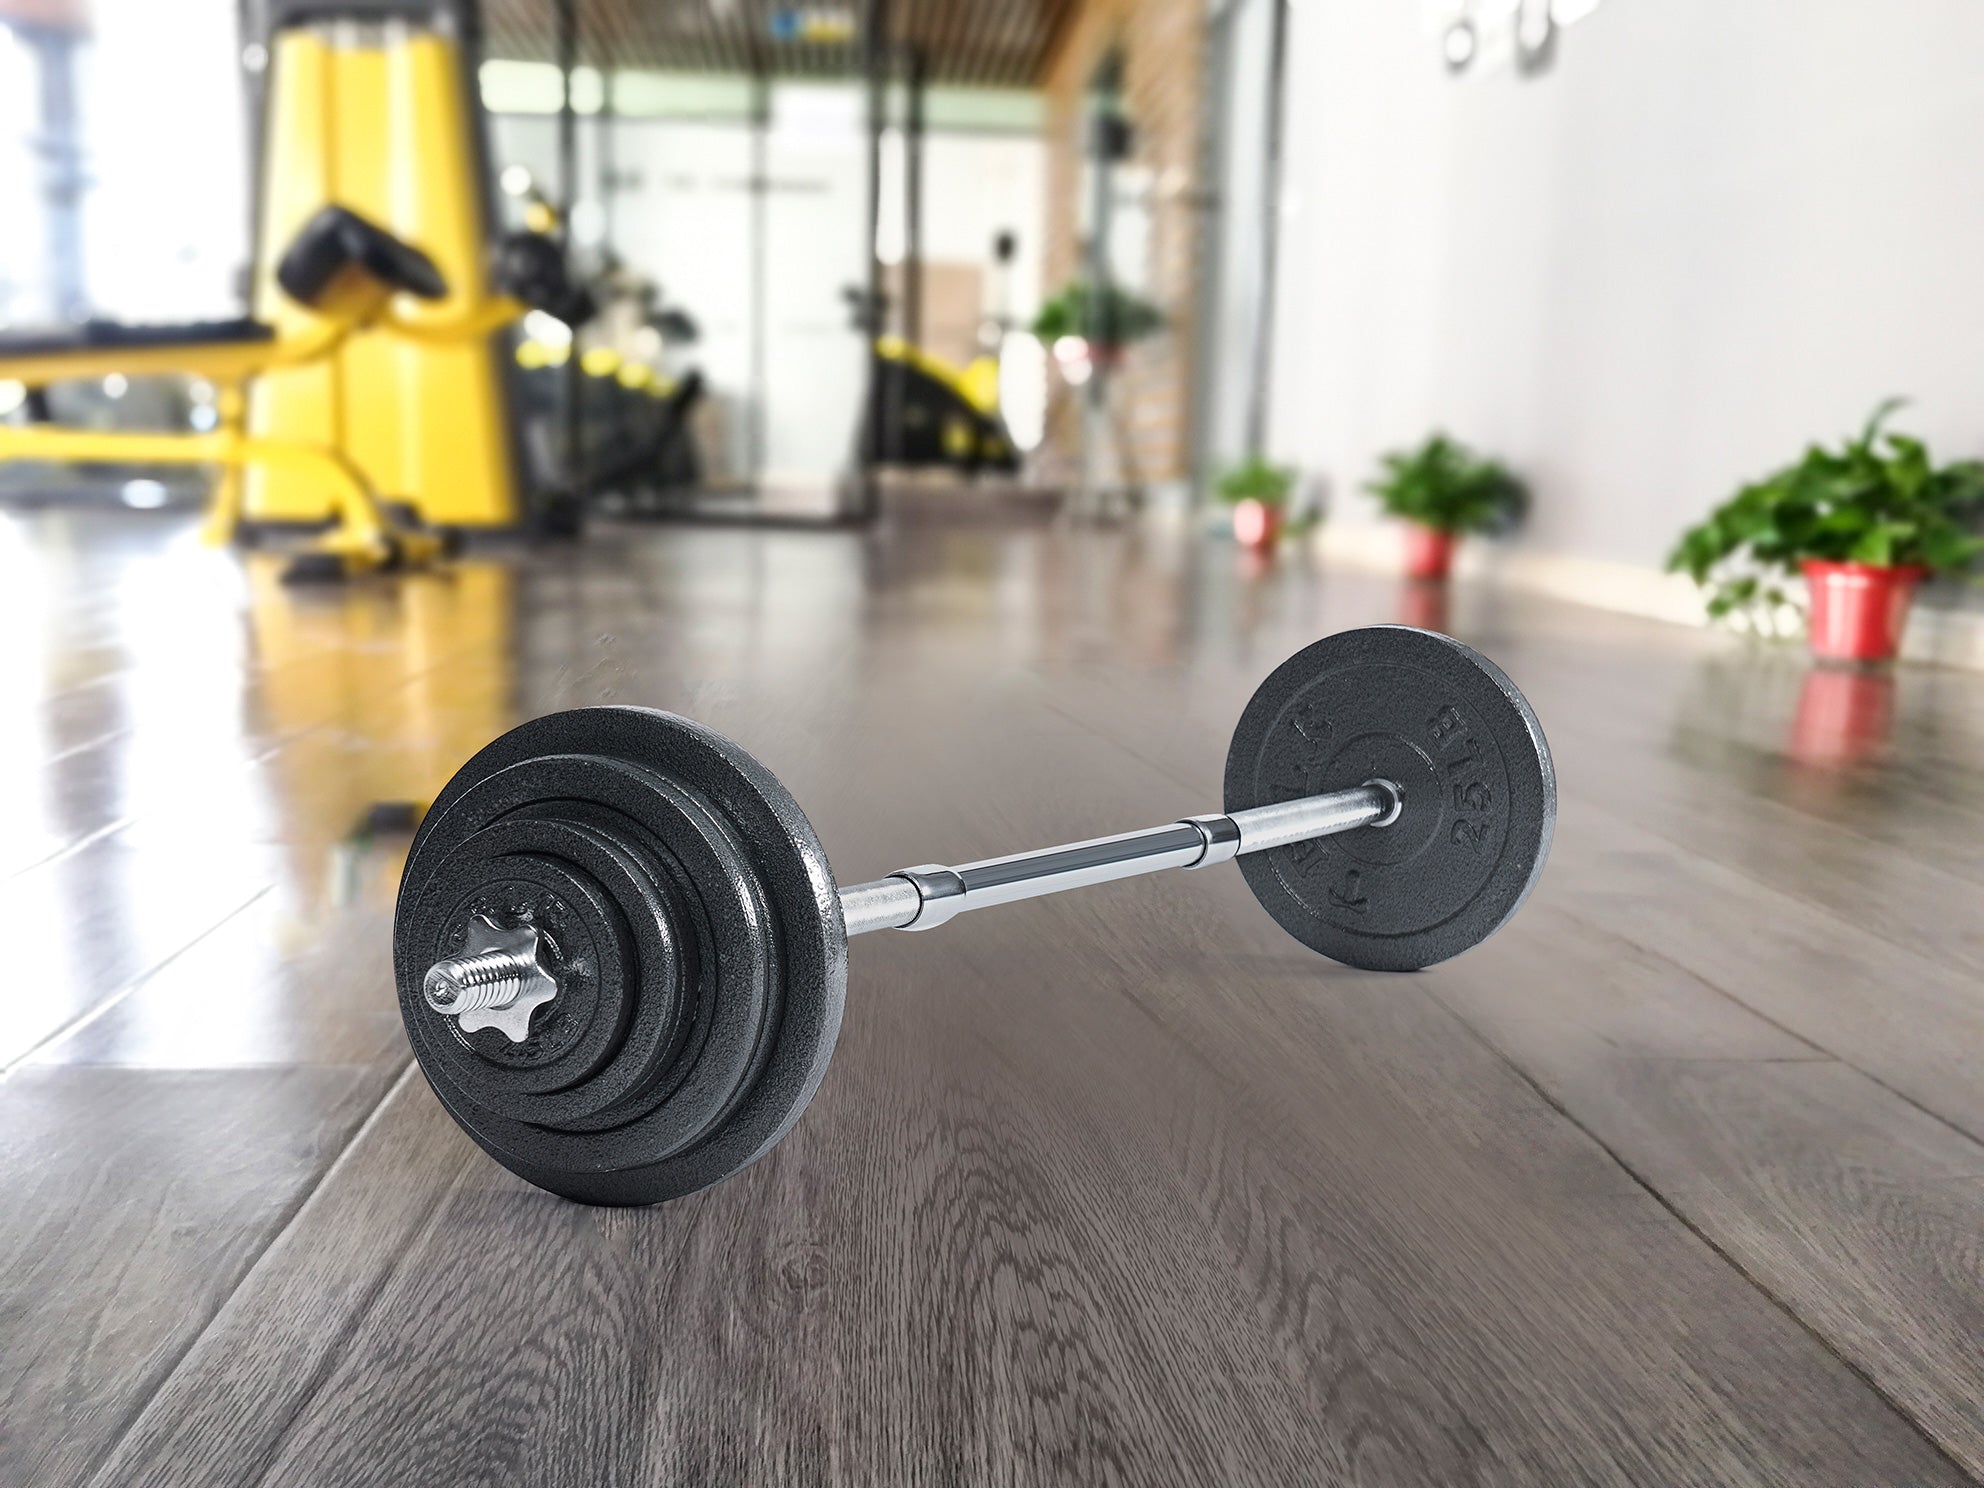 Adjustable 133 LBS Barbell Set + 60" Barbell exceptional quality weigh